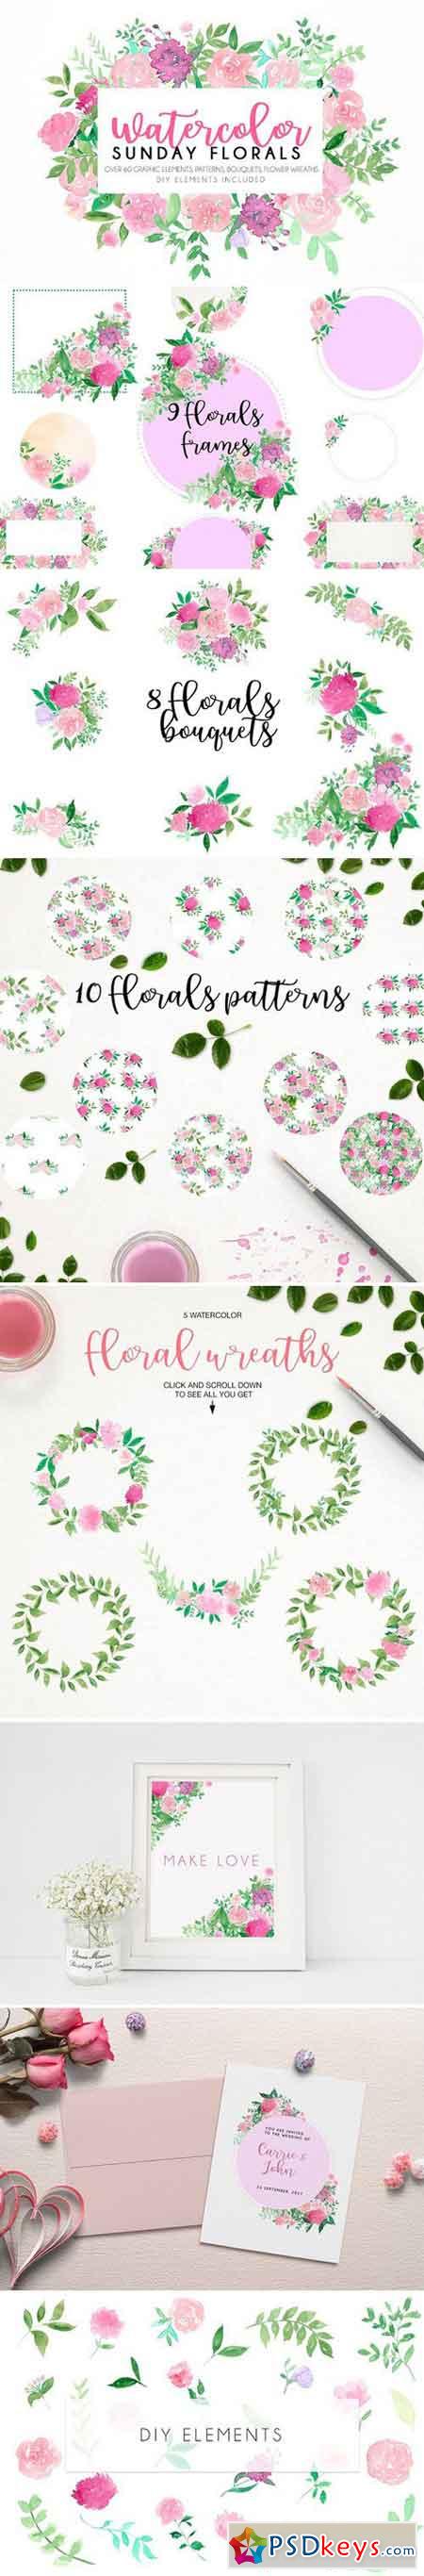 Watercolor Sunday florals 1536419